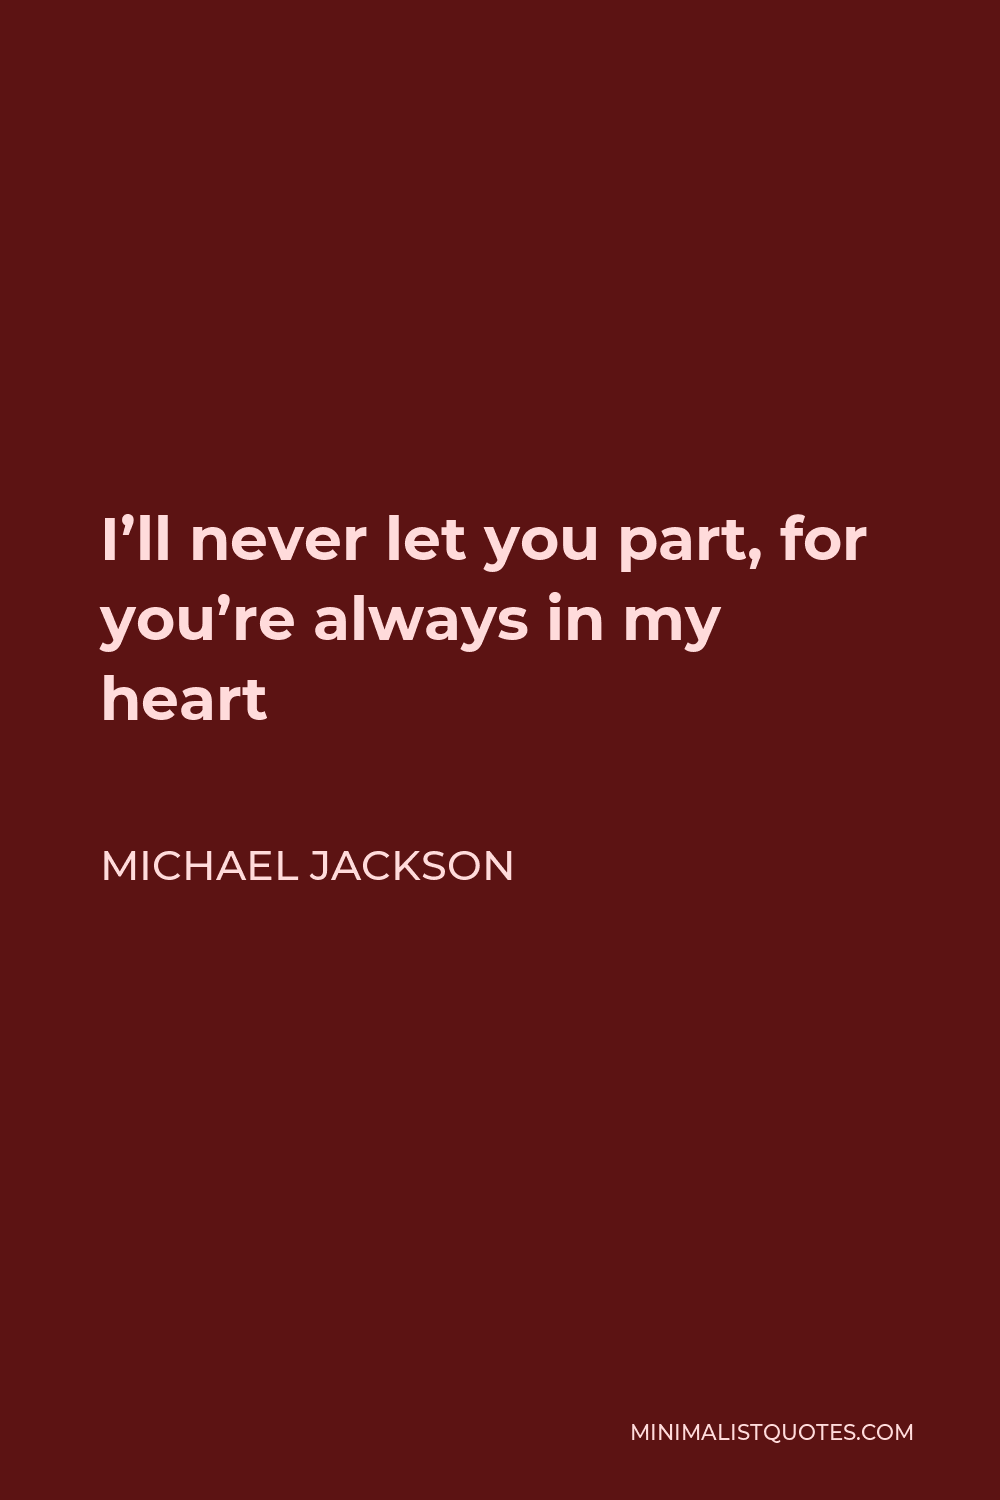 Michael Jackson Quote - I’ll never let you part, for you’re always in my heart